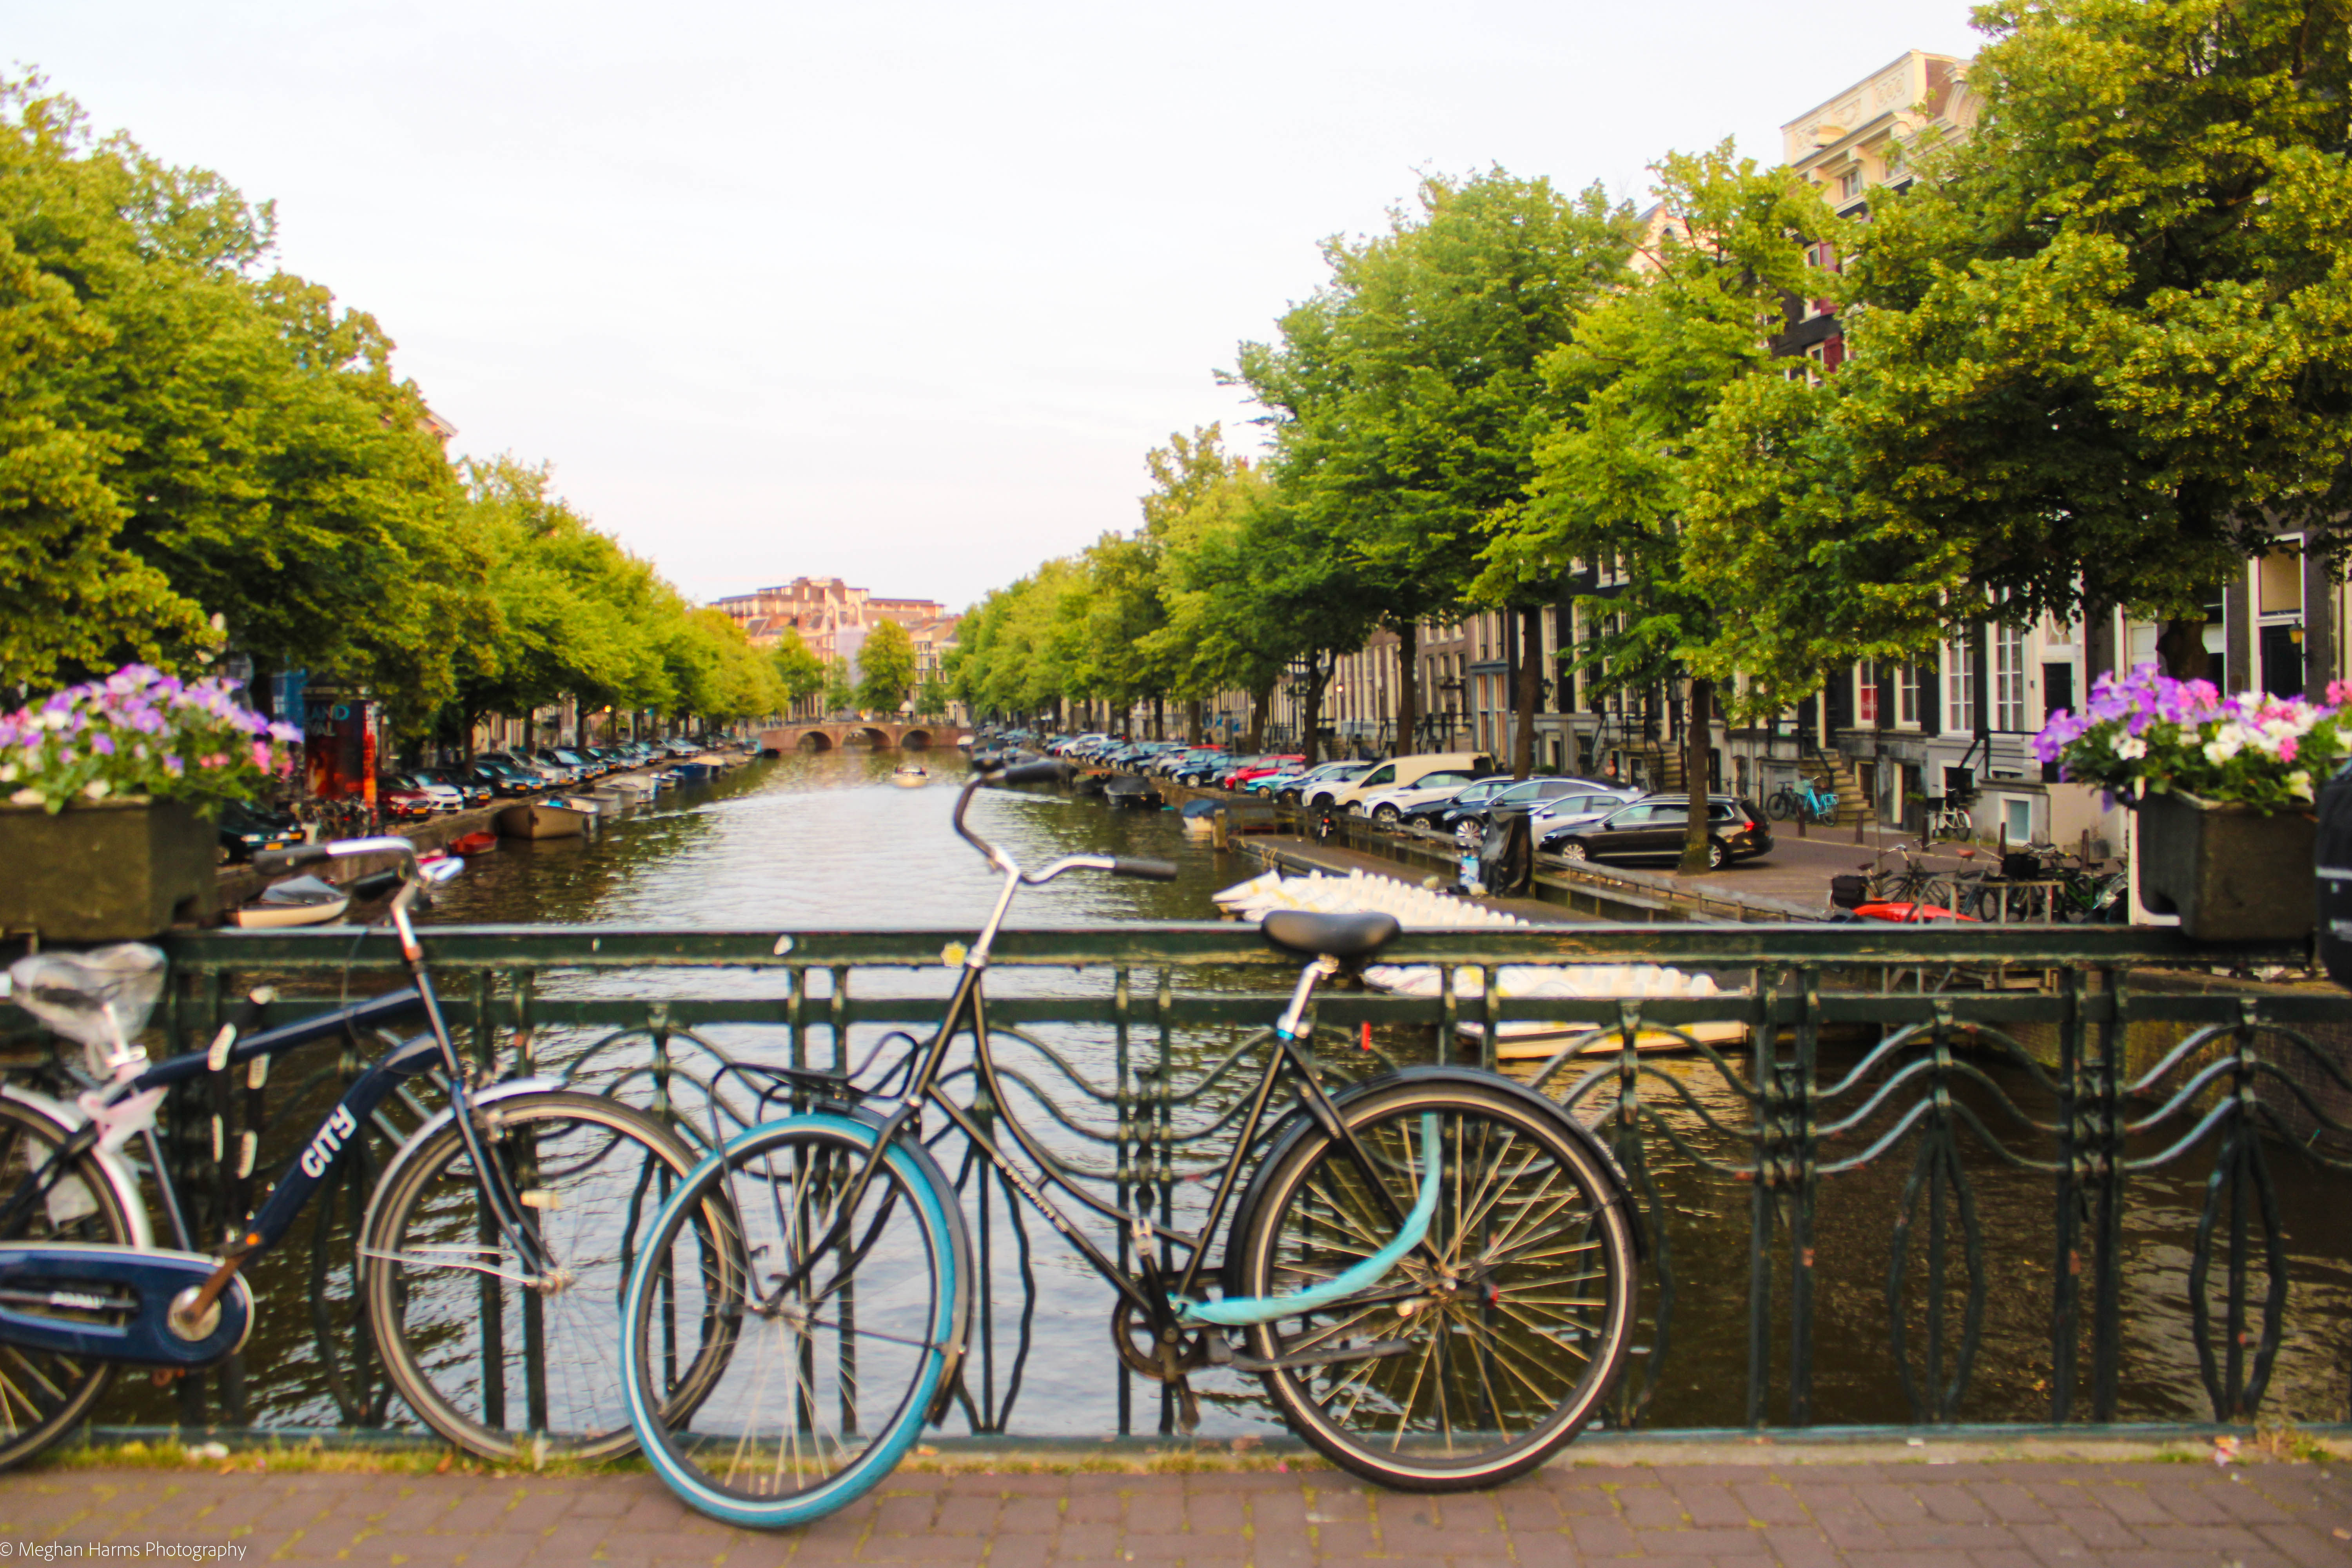 Two bikes in front of a railing over a canal with buckets of flowers on each side of the bikes. Trees and boats are on both sides of the canal.